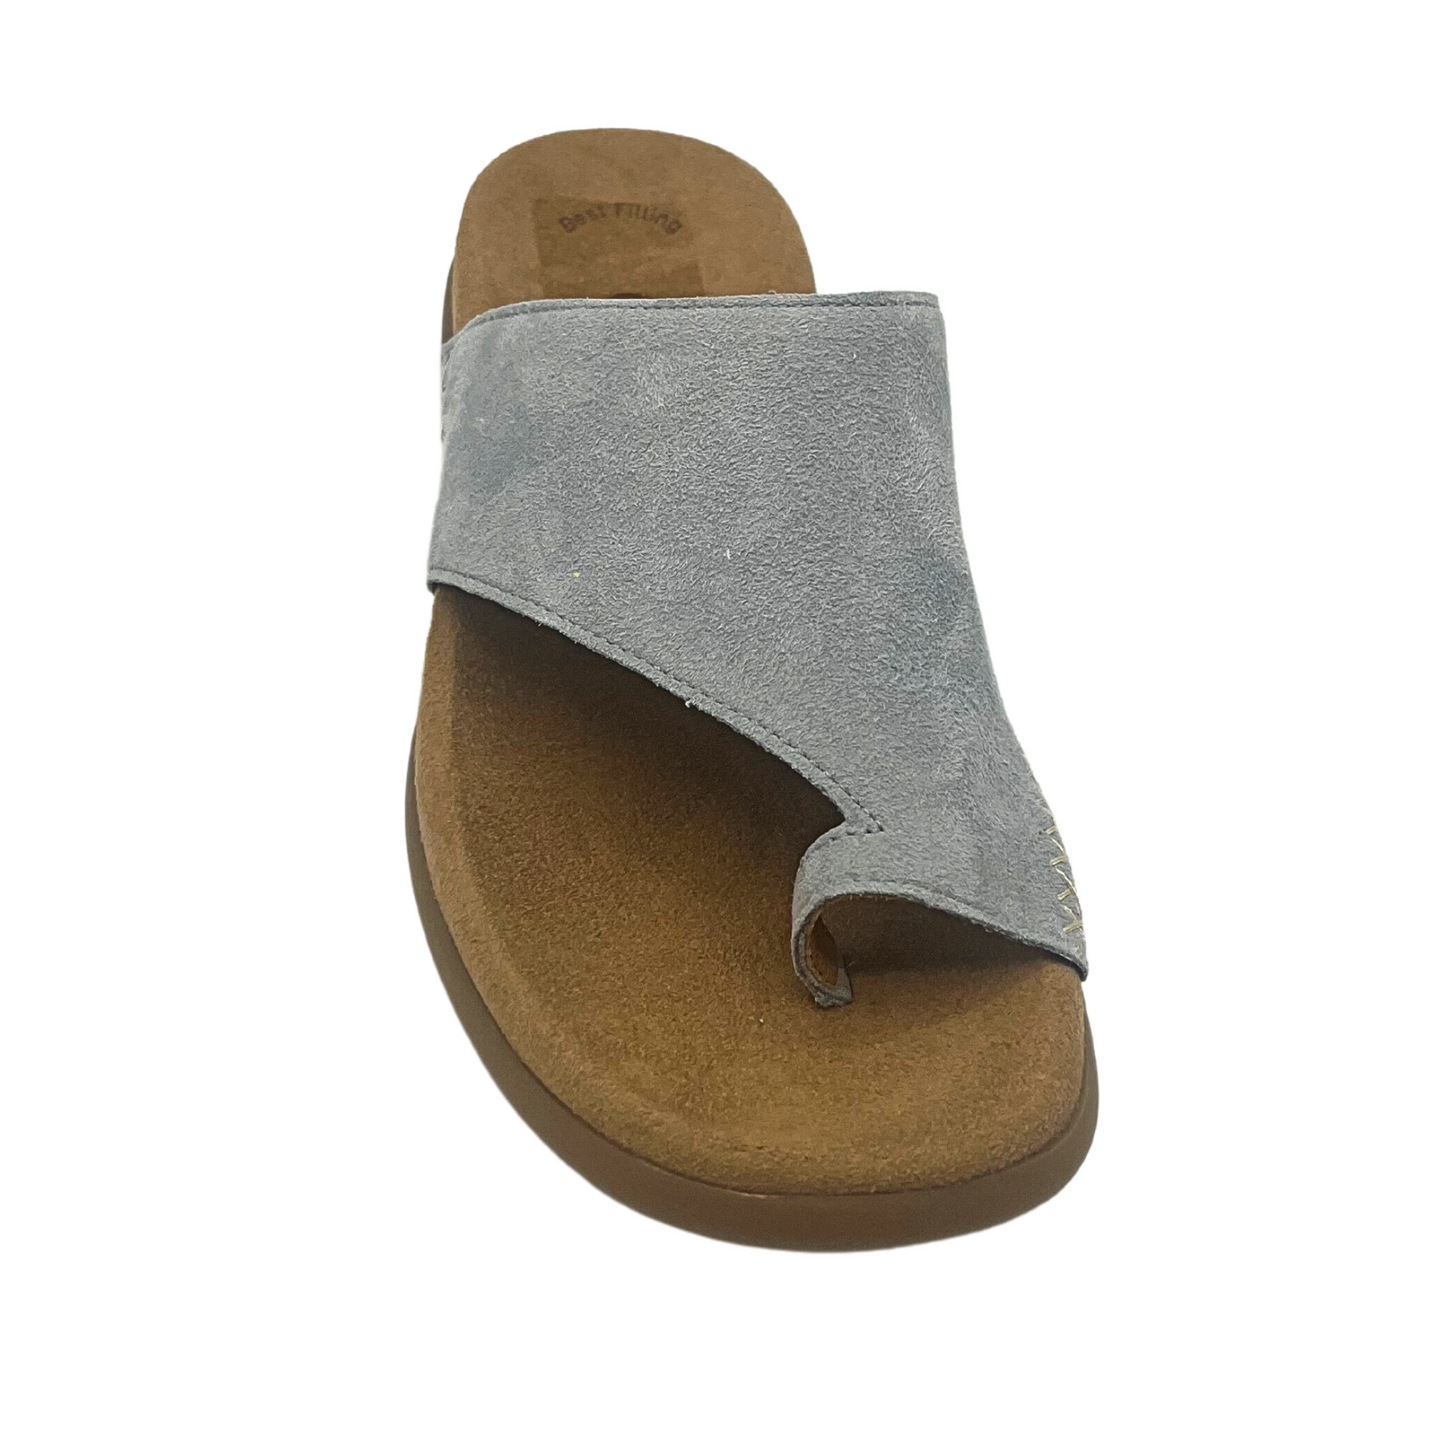 Slip on sandal by Gabor called Hamburg.  Top down shot shows grey/blue color against tan footbed.  Toe loop construction with good coverage around rest of foot.